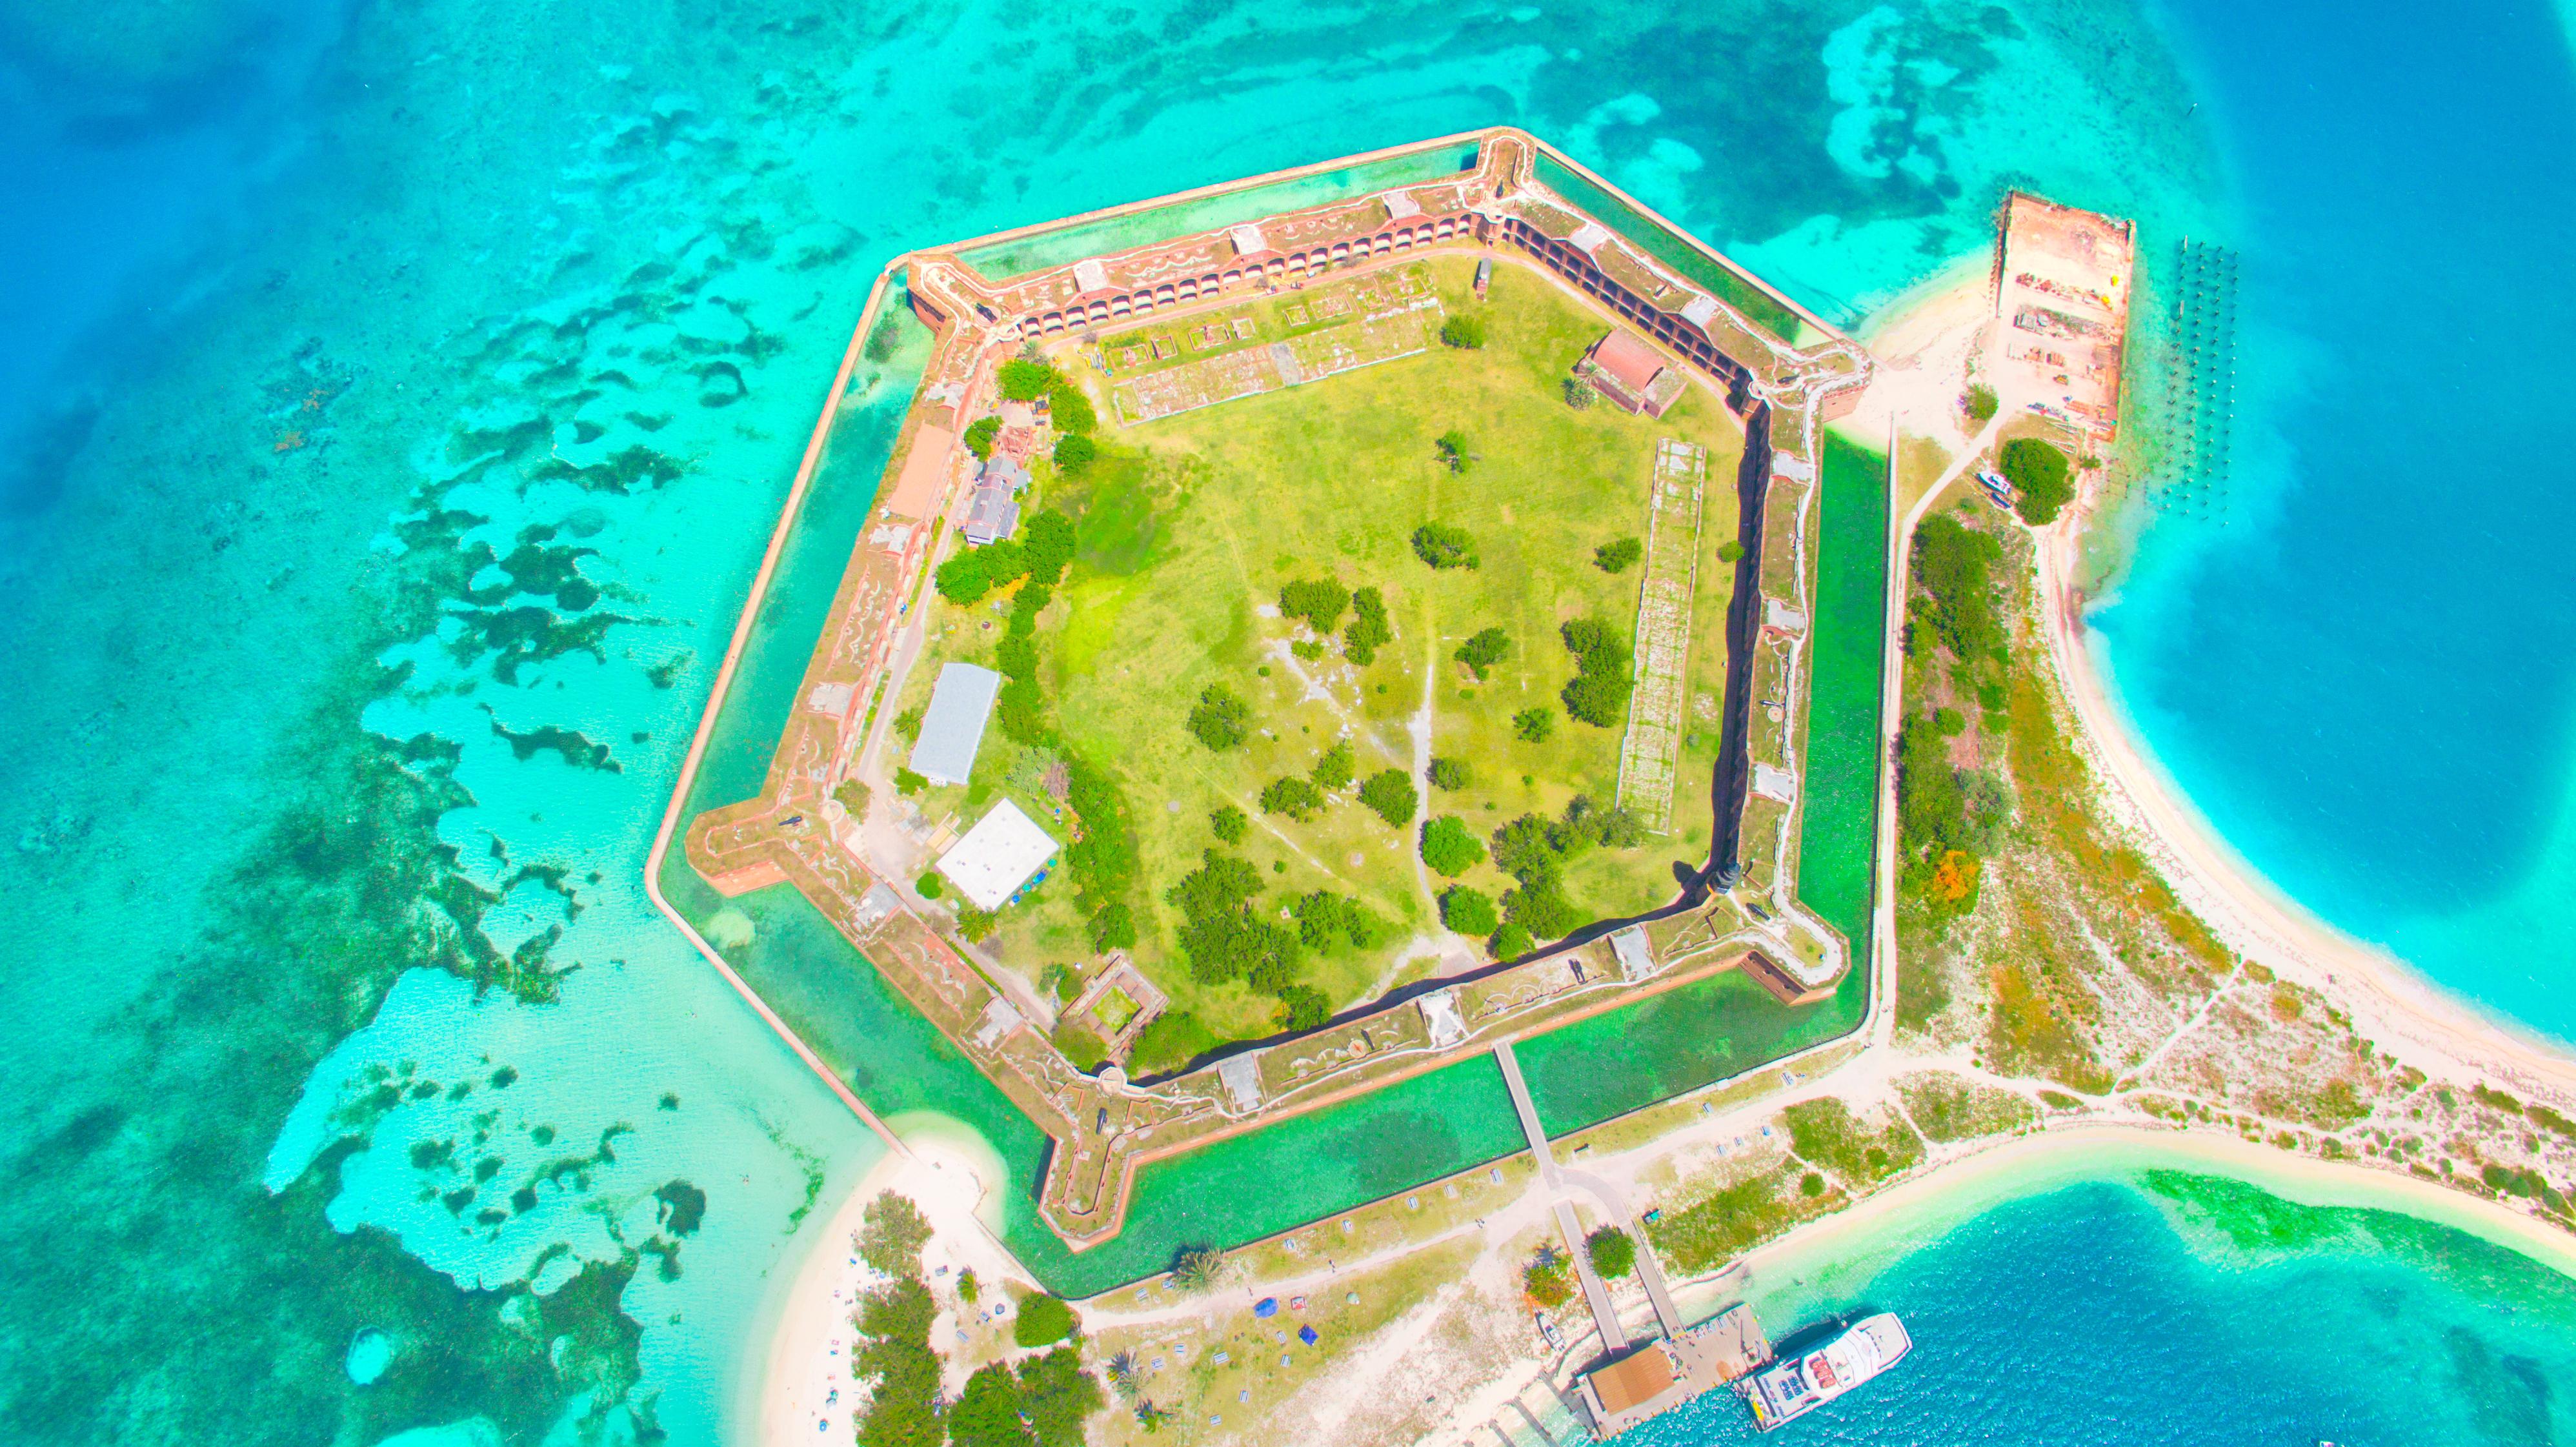 Dry Tortugas National Park attraction reviews - Dry Tortugas National Park  tickets - Dry Tortugas National Park discounts - Dry Tortugas National Park  transportation, address, opening hours - attractions, hotels, and food